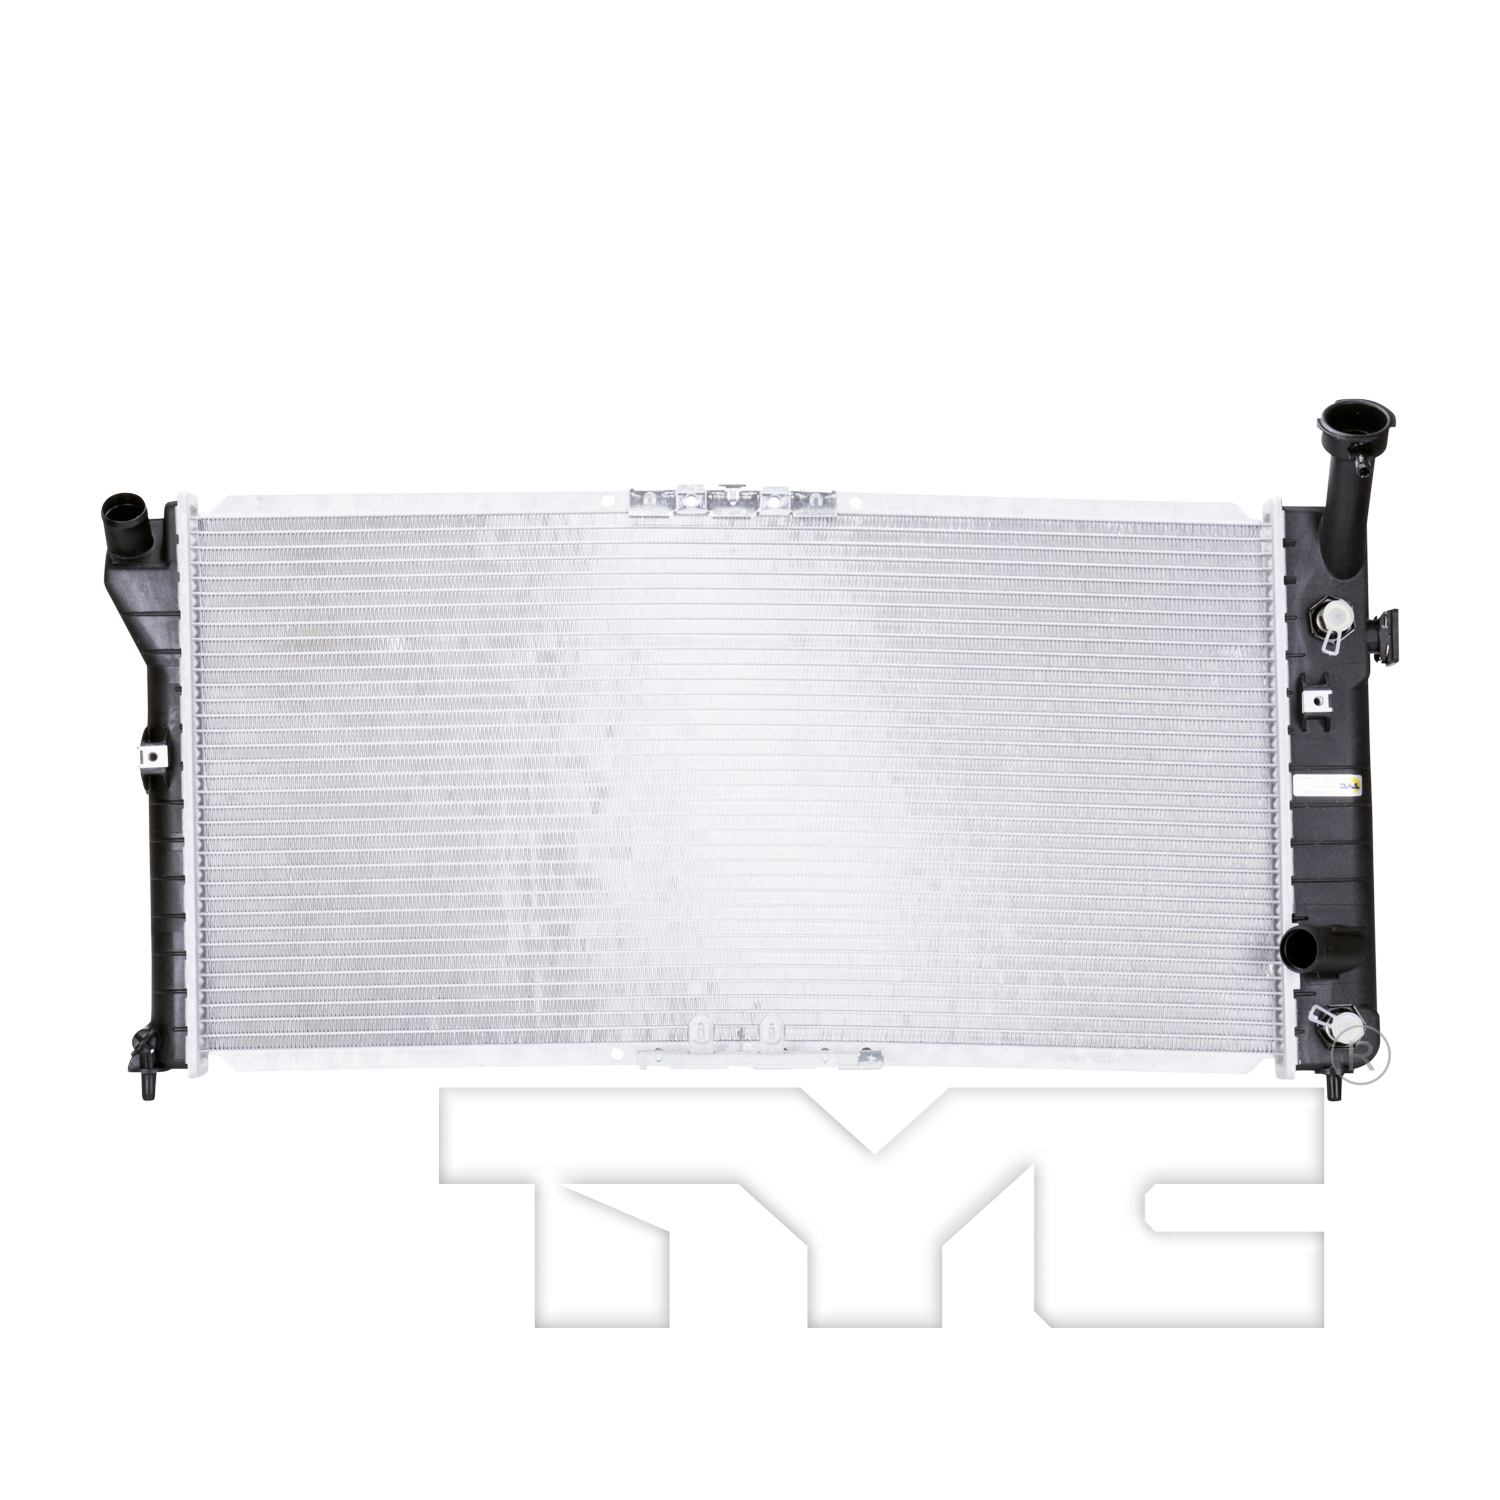 Aftermarket RADIATORS for CHEVROLET - MONTE CARLO, MONTE CARLO,95-97,Radiator assembly